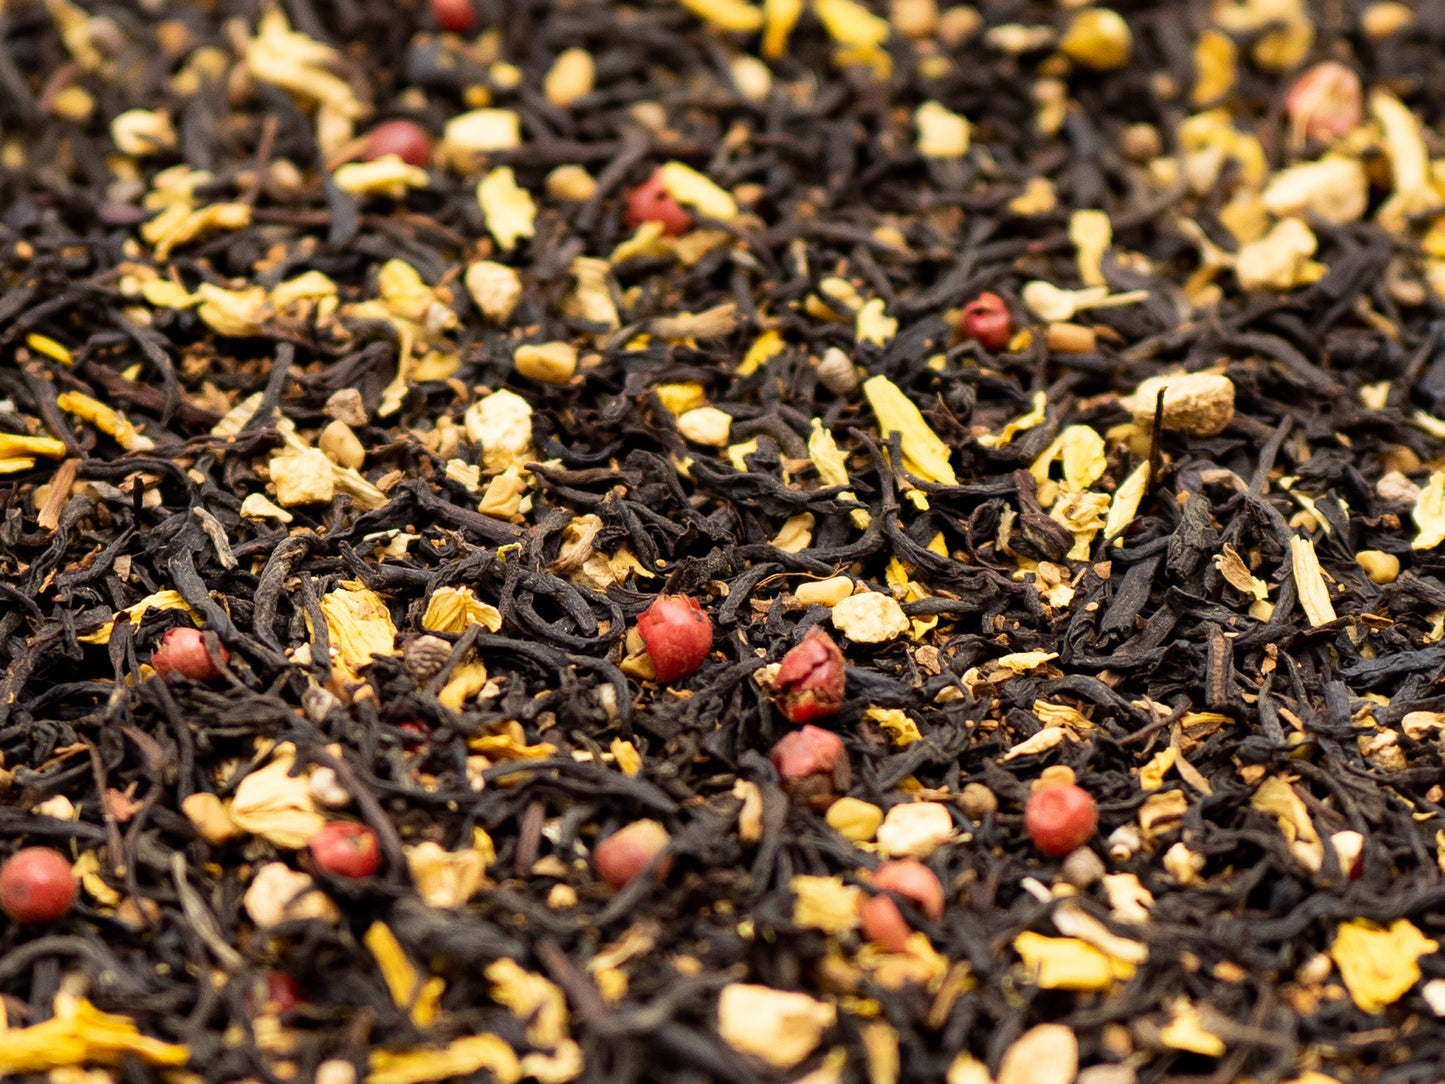 A close up of loose Aromatic Chai spiced black tea from TEA23